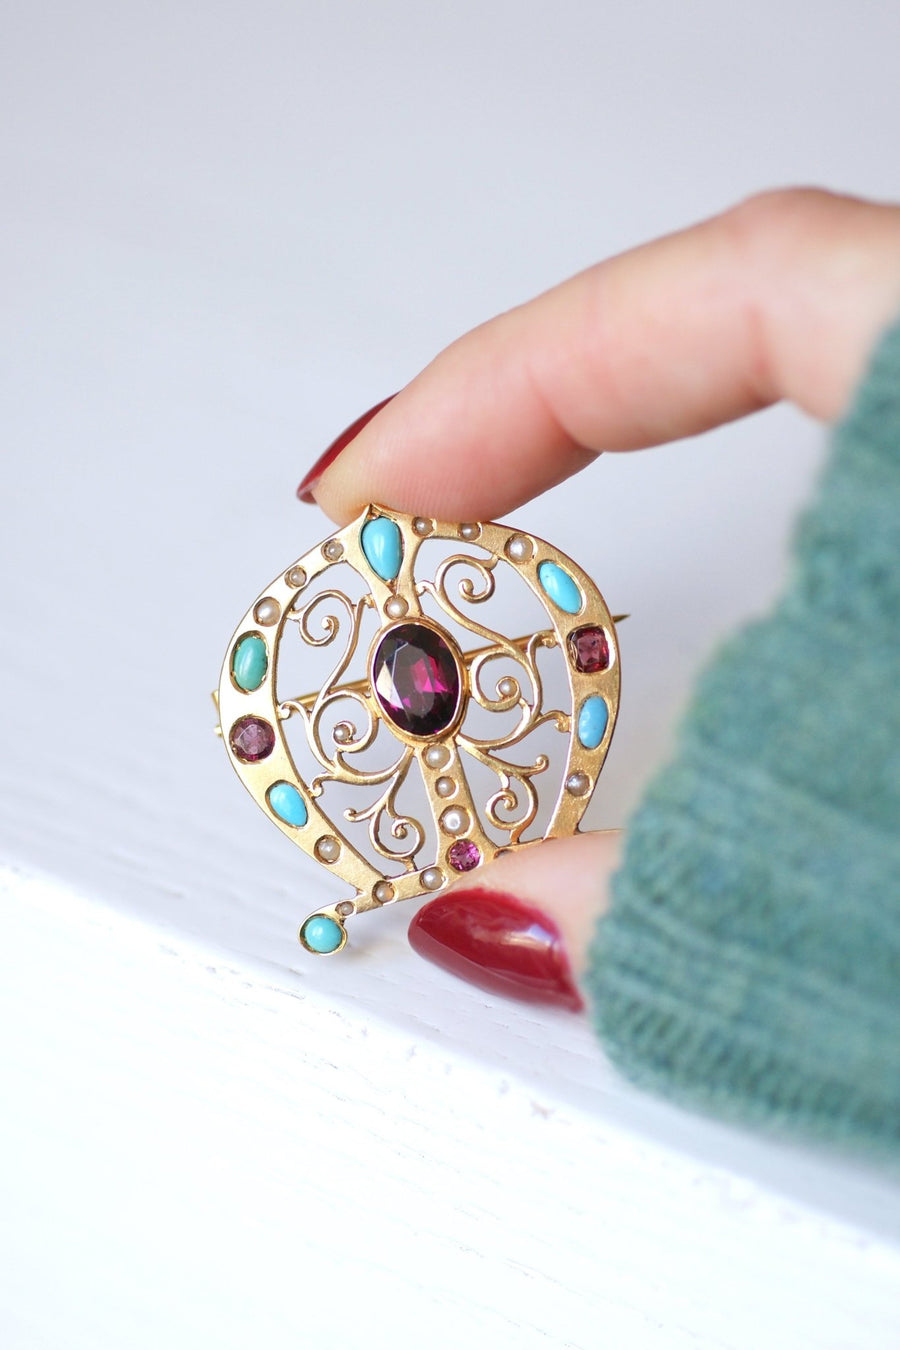 Antique horseshoe brooch in gold, turquoise, pearls and garnets - Galerie Pénélope